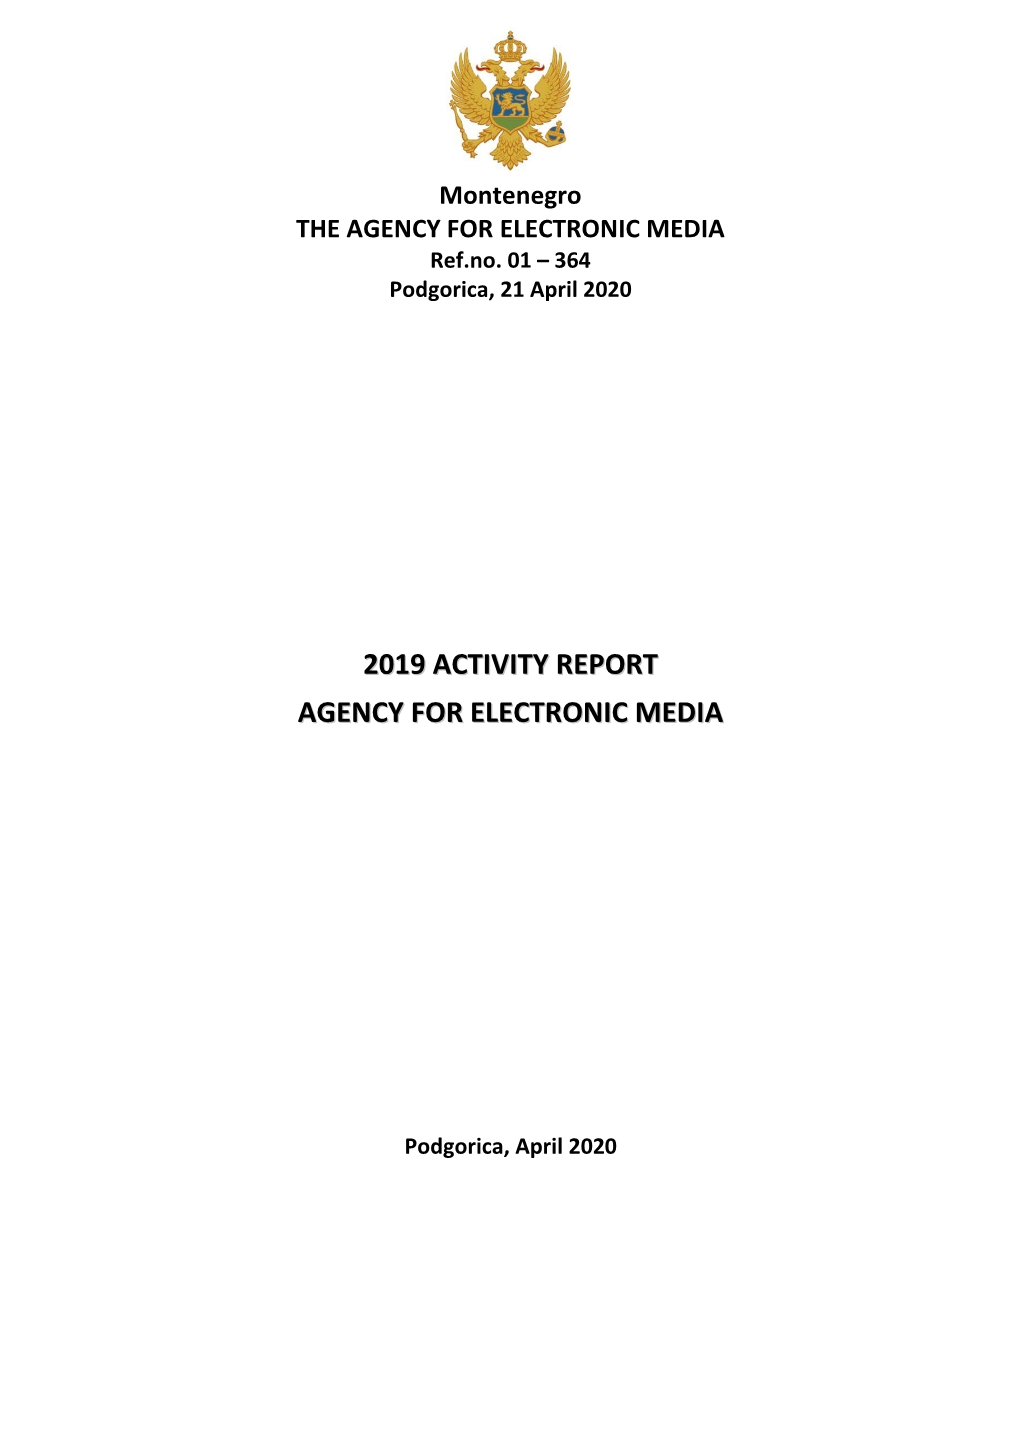 2019 Activity Report Agency for Electronic Media